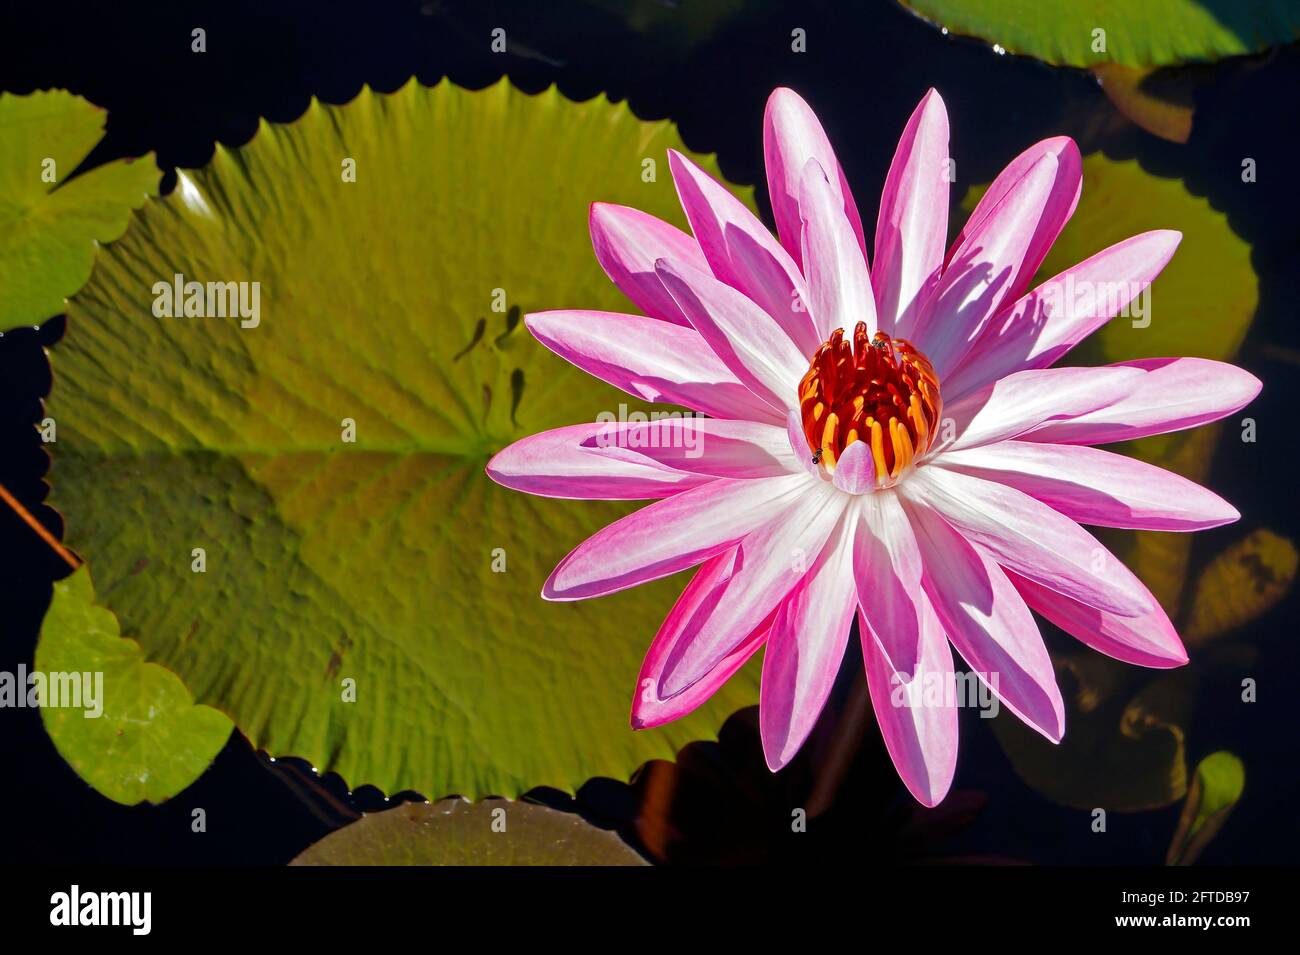 Pink water lily (Nymphaea pubescens) on lake Stock Photo